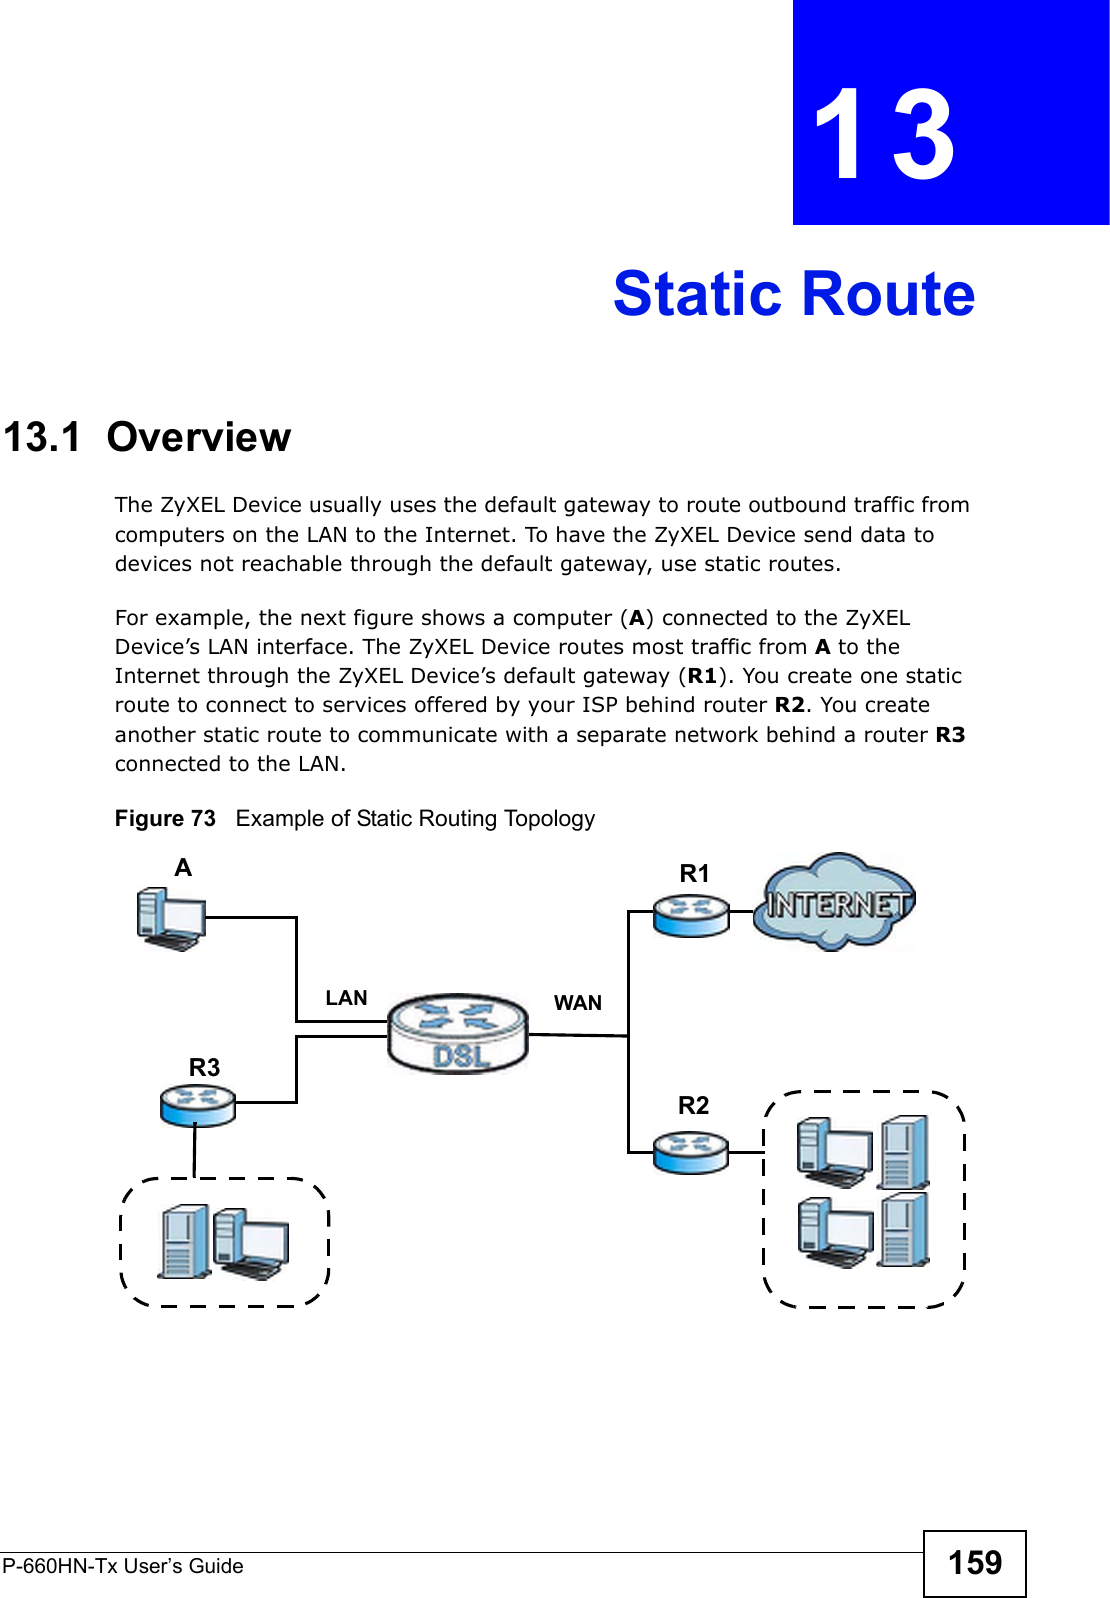 P-660HN-Tx User’s Guide 159CHAPTER  13 Static Route13.1  Overview The ZyXEL Device usually uses the default gateway to route outbound traffic from computers on the LAN to the Internet. To have the ZyXEL Device send data to devices not reachable through the default gateway, use static routes.For example, the next figure shows a computer (A) connected to the ZyXEL Device’s LAN interface. The ZyXEL Device routes most traffic from A to the Internet through the ZyXEL Device’s default gateway (R1). You create one static route to connect to services offered by your ISP behind router R2. You create another static route to communicate with a separate network behind a router R3 connected to the LAN.   Figure 73   Example of Static Routing TopologyWANR1R2AR3LAN